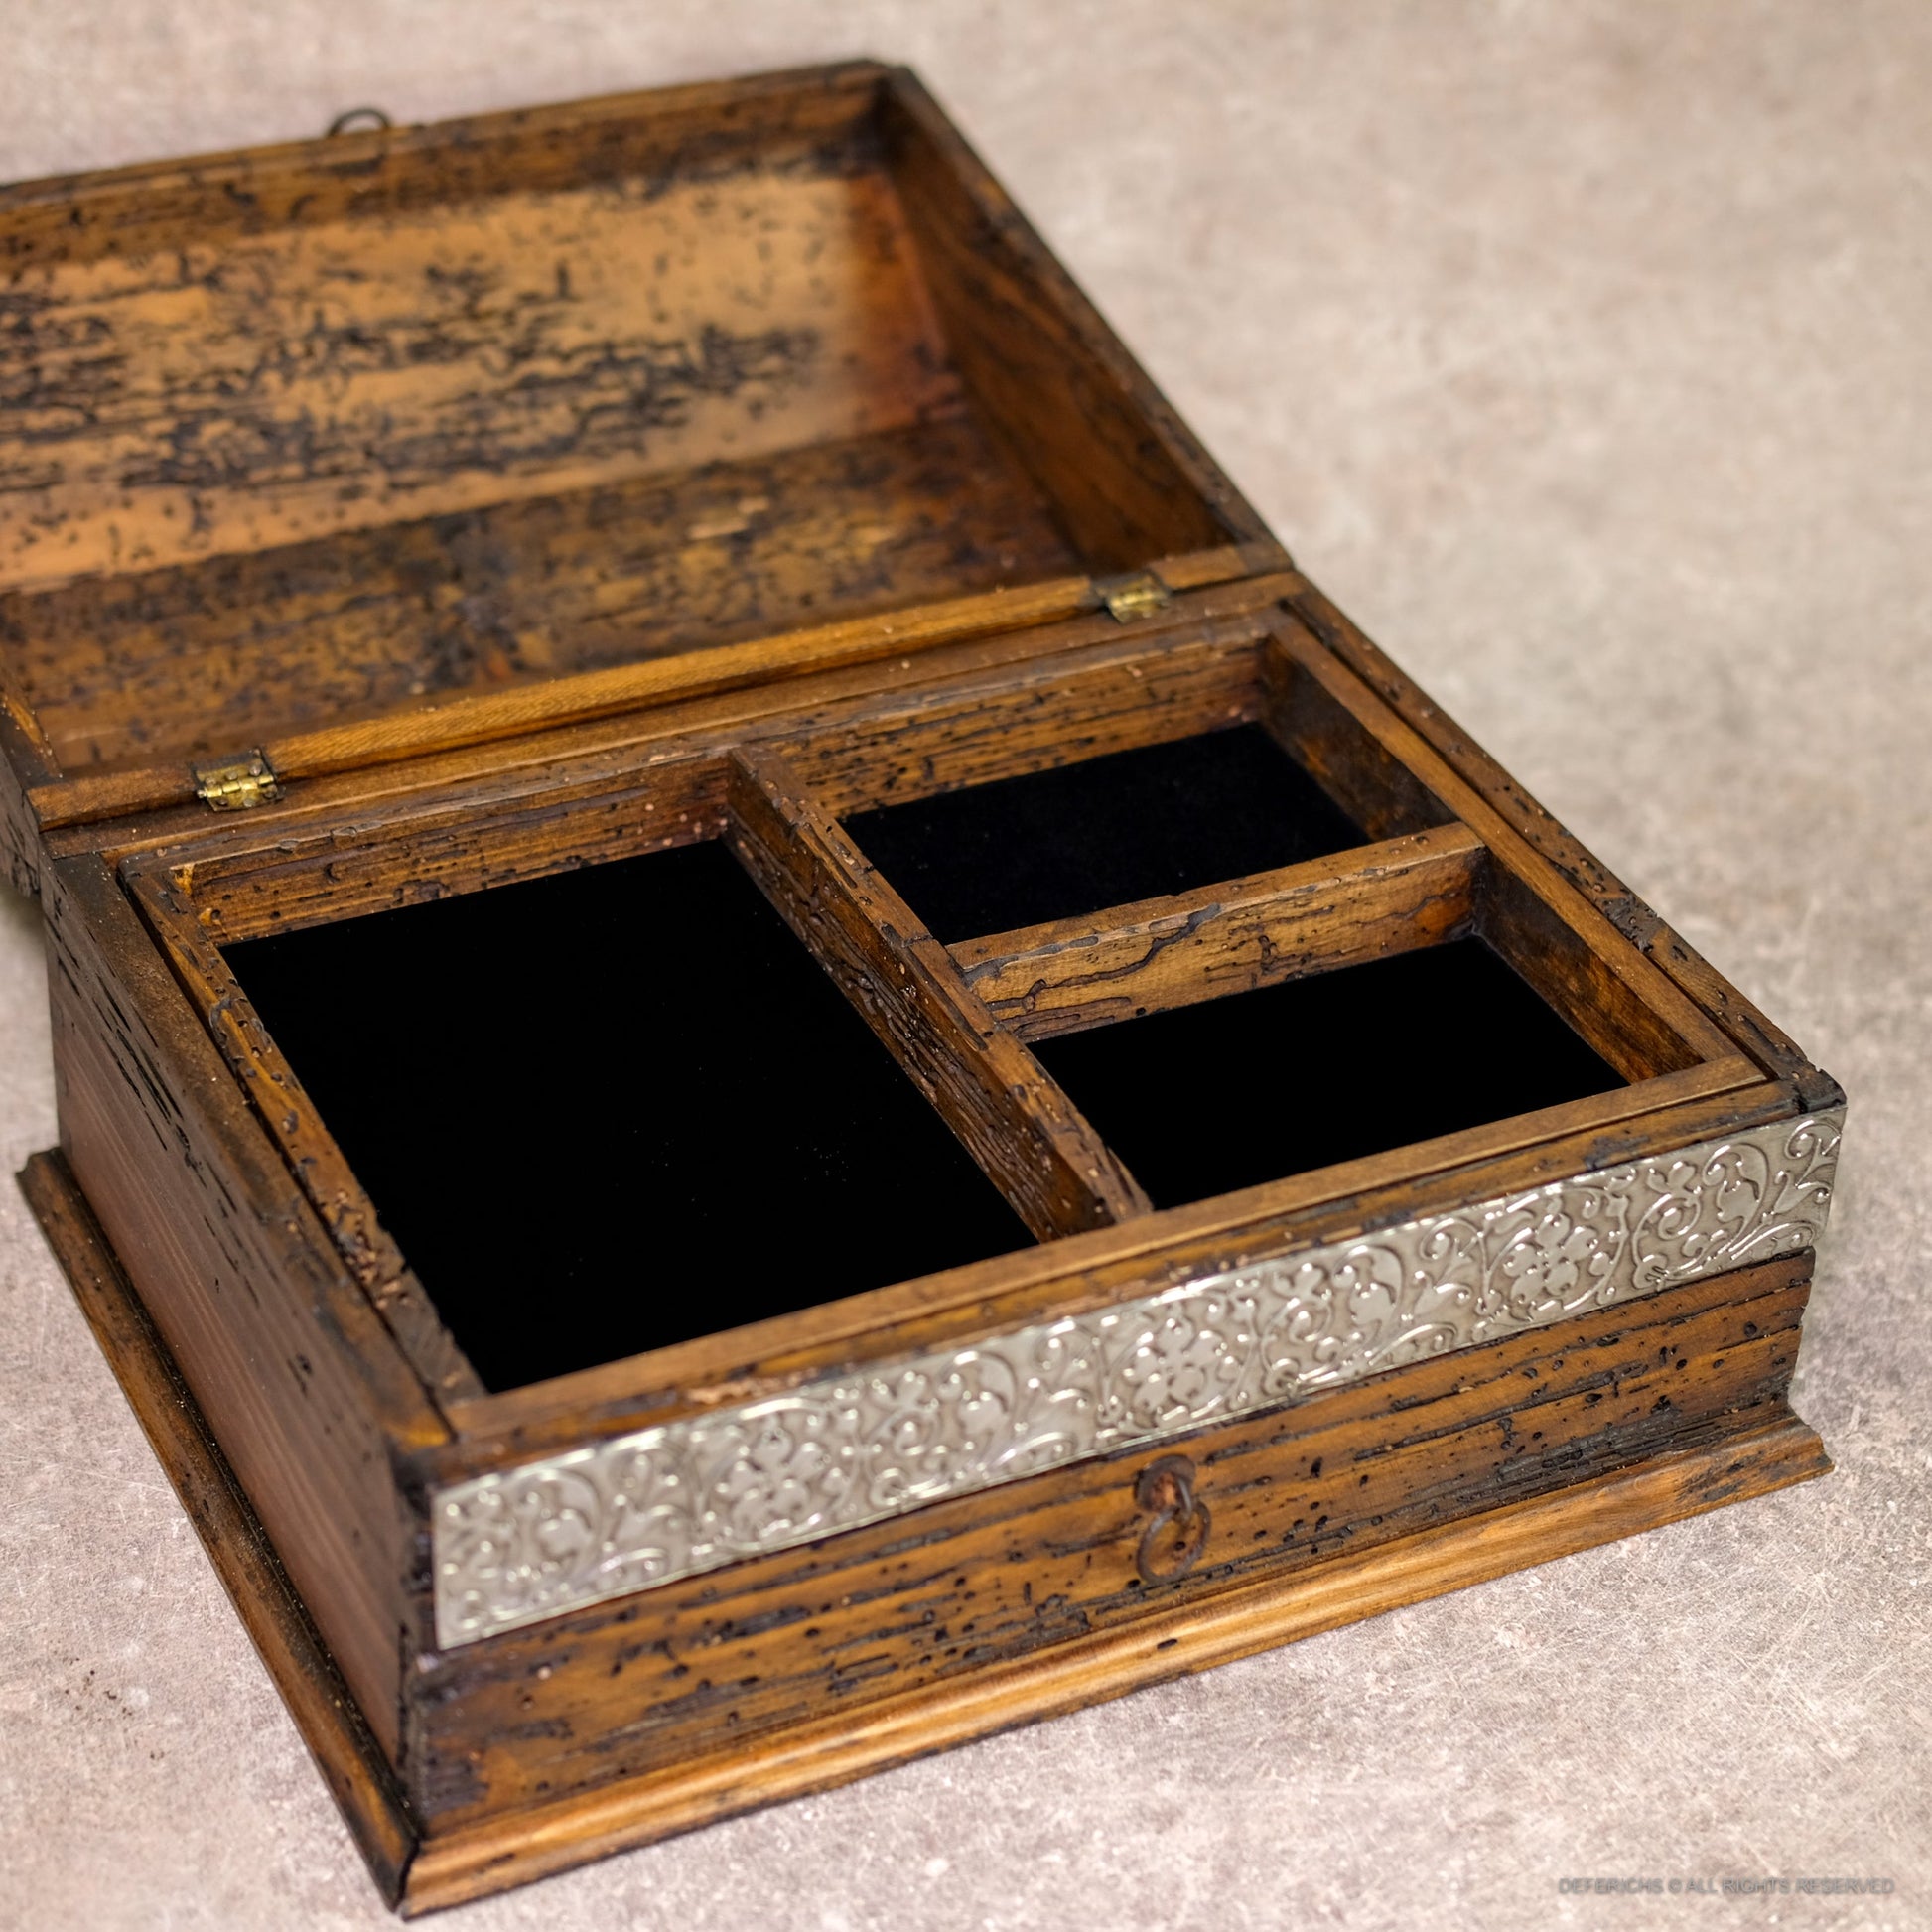 Rustic Jewelry Box with Drawer - Deferichs